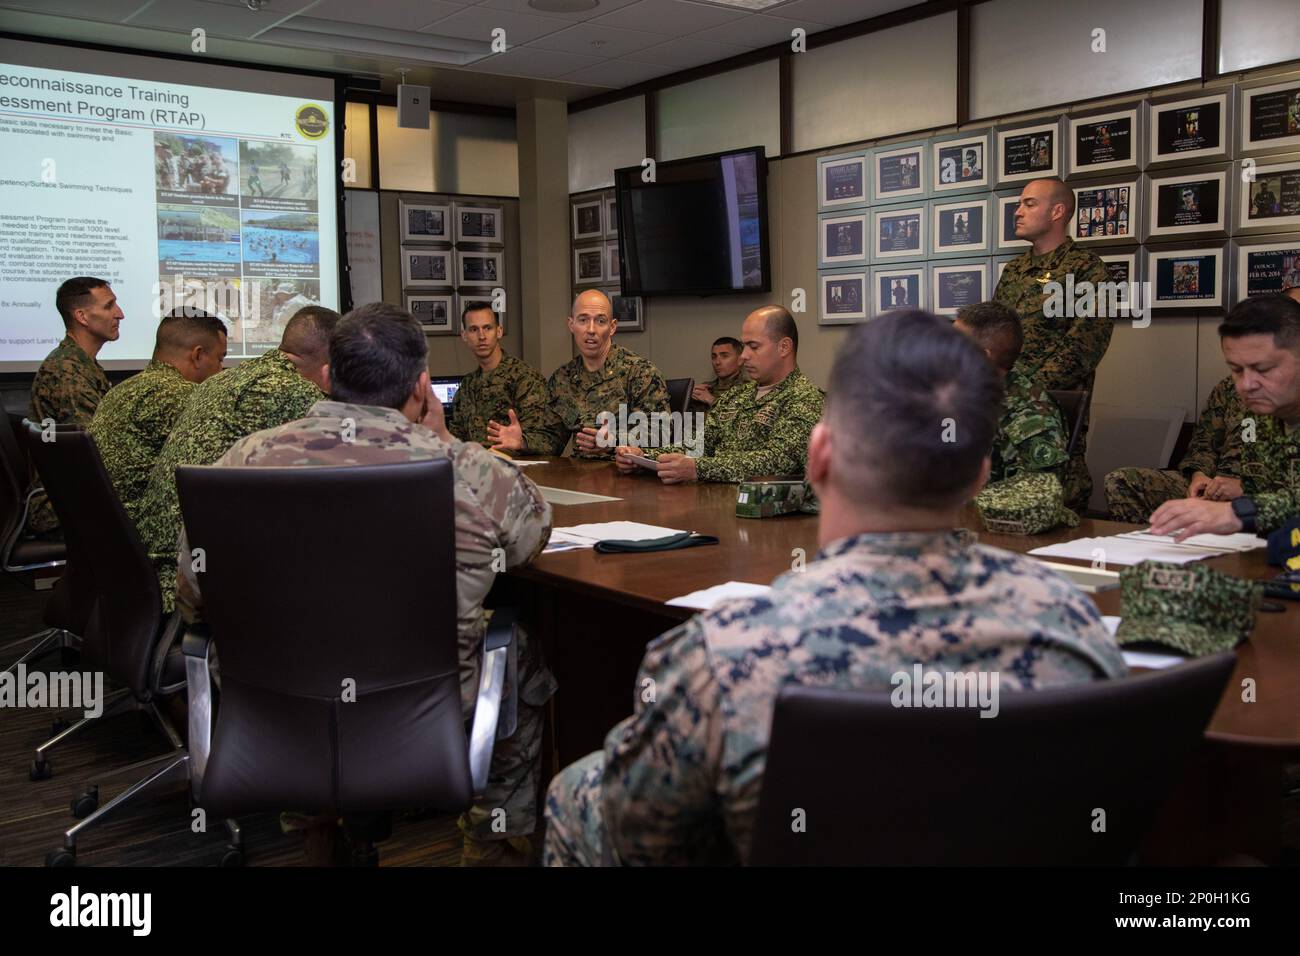 U.S. Marine Corps Maj. Jordan Morgan, company commander at Infantry Training Battalion School of Infantry - West briefs Colombian military leadership about expeditionary operations training group during a visit to Marine Corps Base Camp Pendleton, California, Feb. 15, 2023. The visit is designed to reinforce strategic relationships between senior Colombian military and senior Marine Corps leadership. During the visit, Marine Corps leaders briefed senior Colombian leadership about tactical concepts and general strategy. Stock Photo